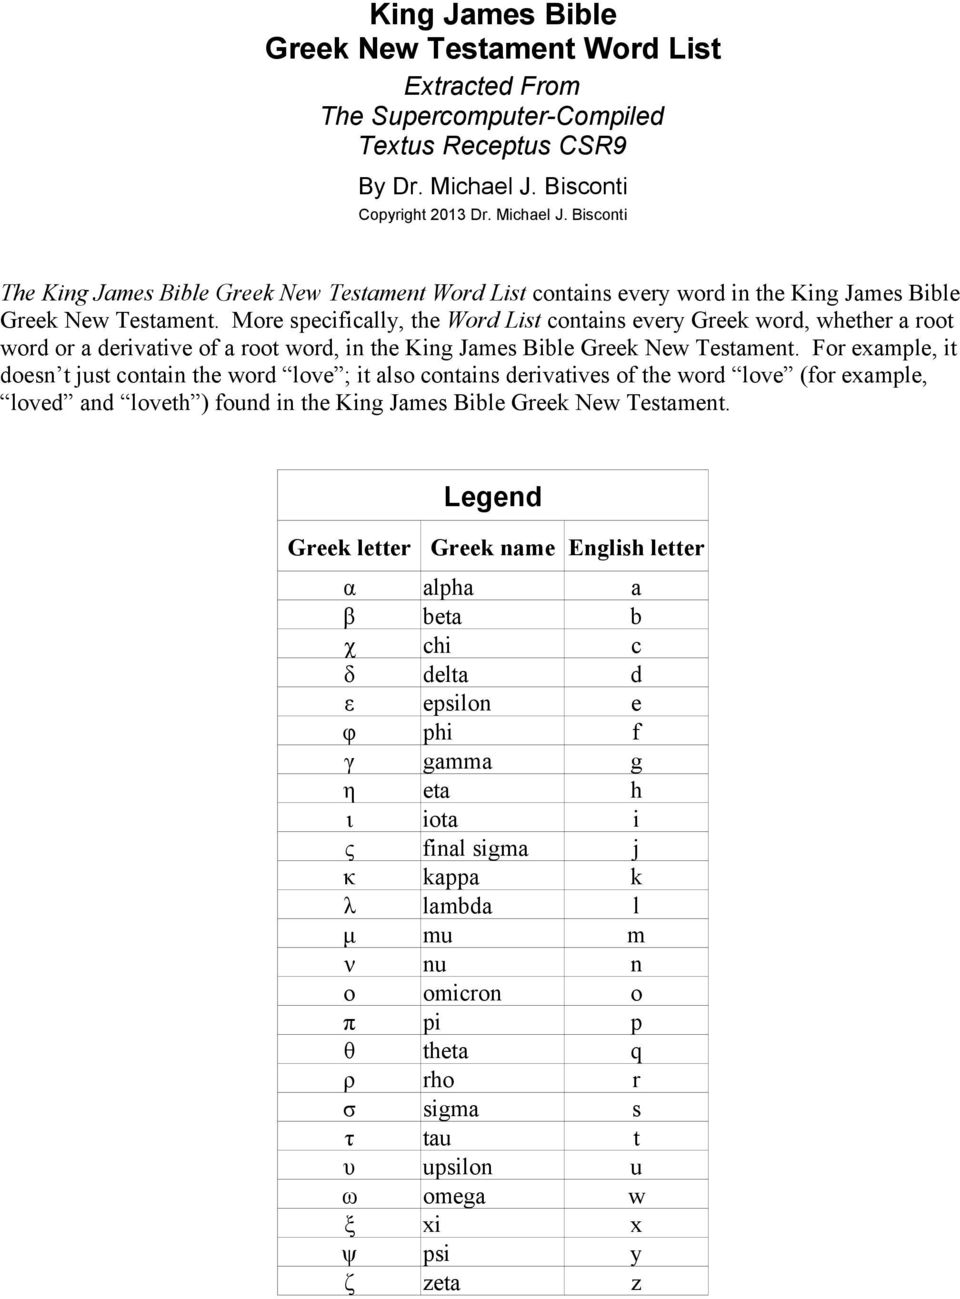 More specifically, the Word List contains every Greek word, whether a root word or a derivative of a root word, in the King James Bible Greek New Testament.